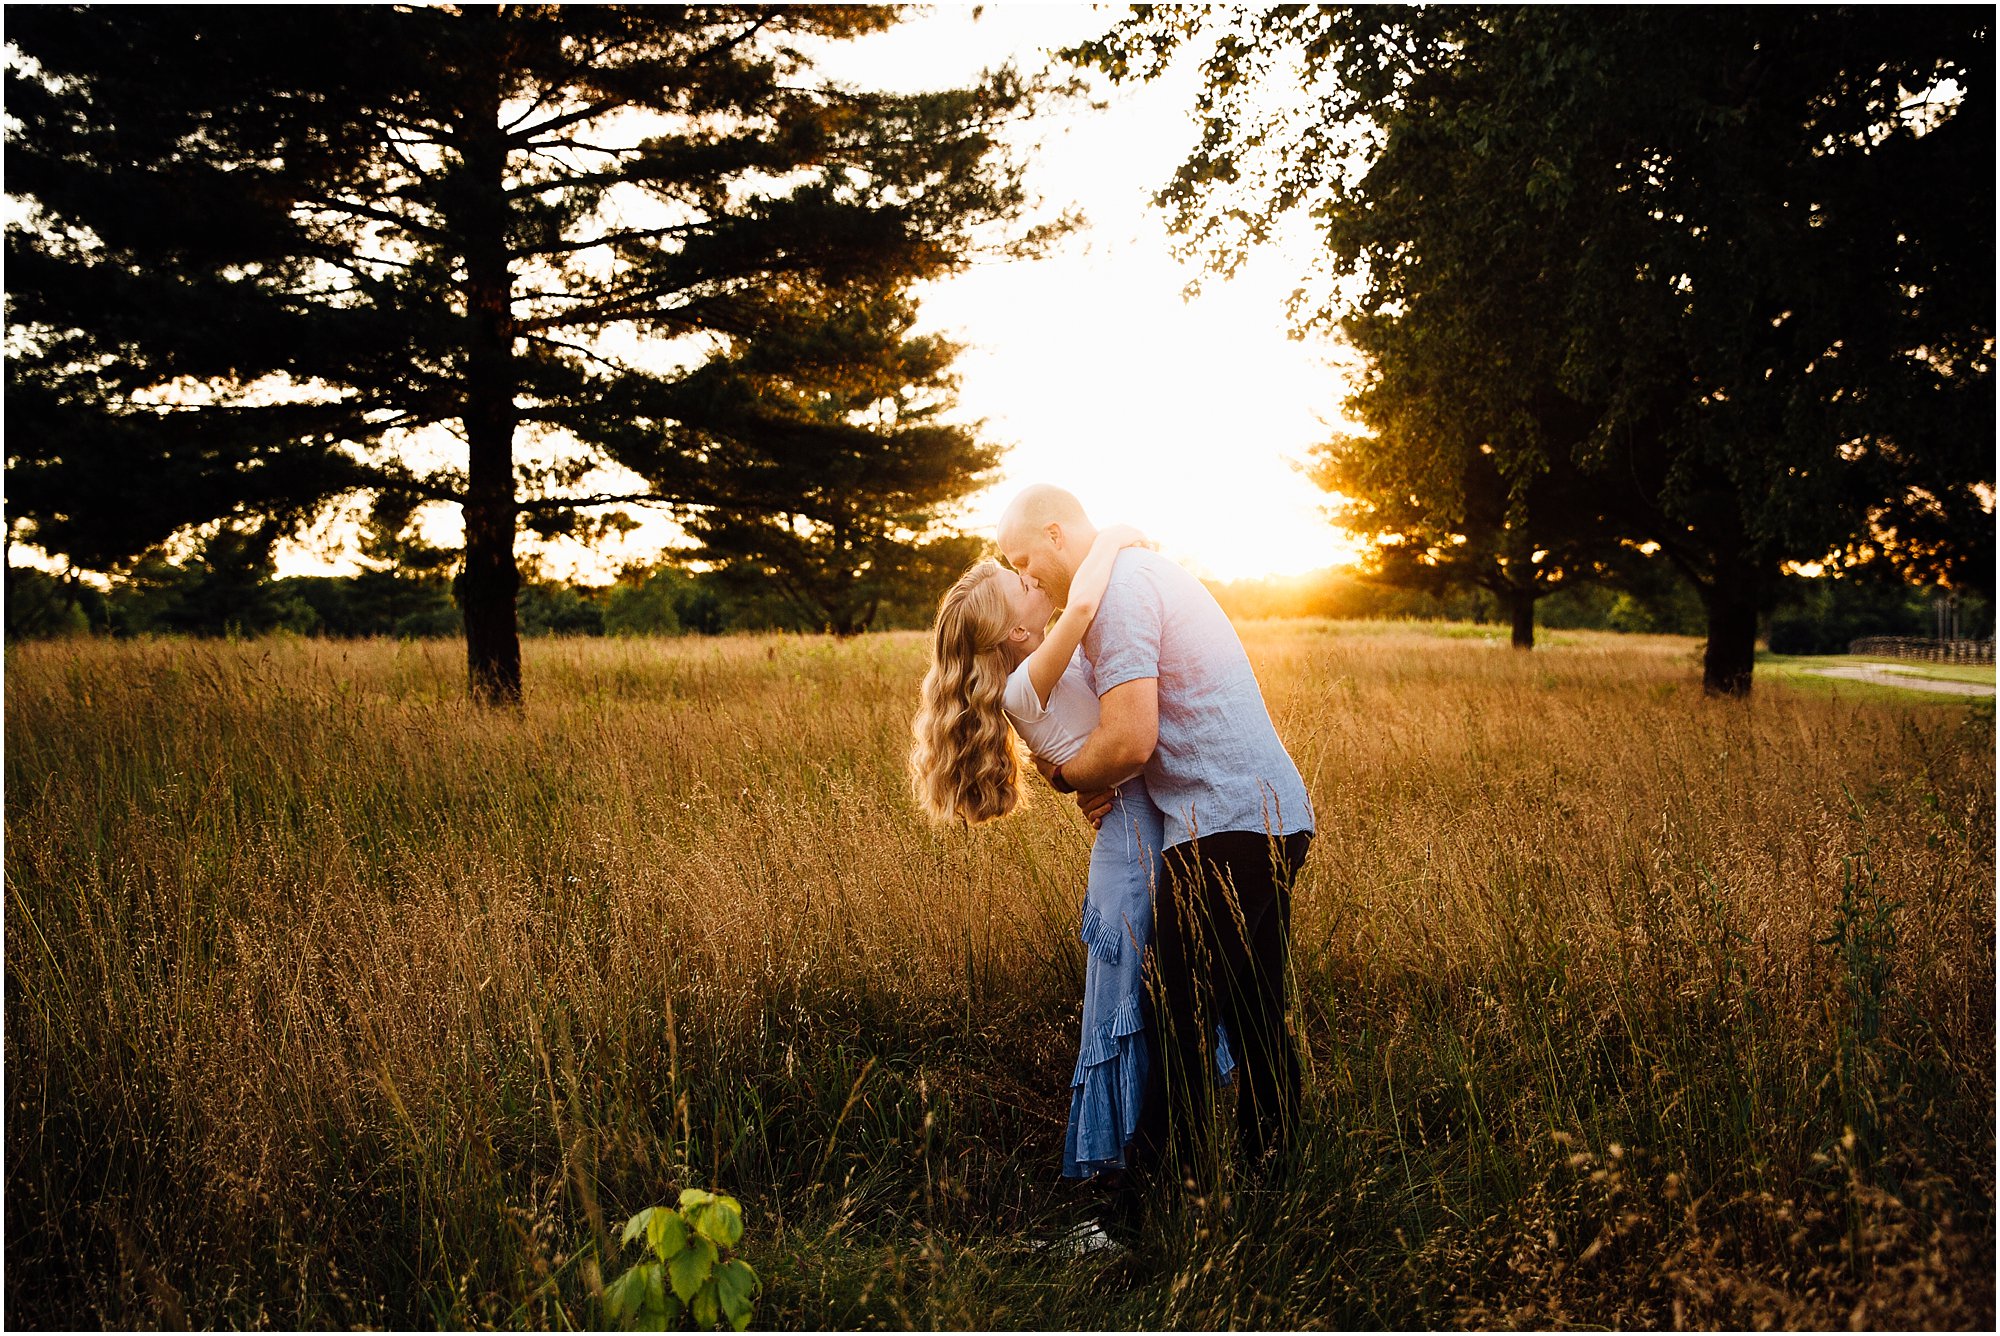 Engaged couple kissing in a golden field during sunset